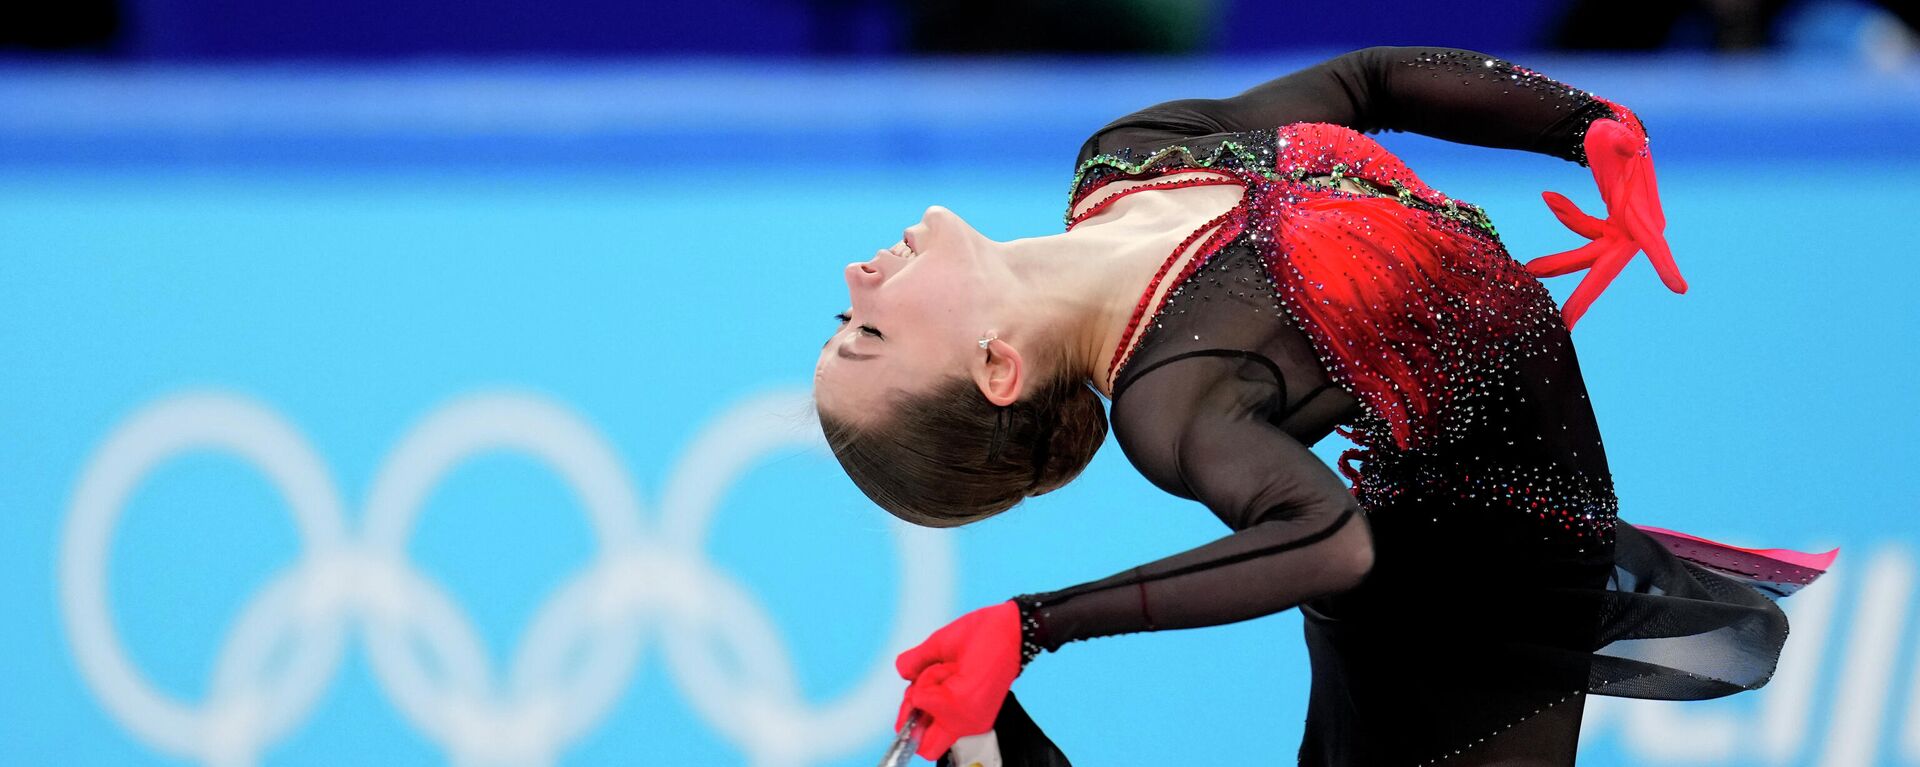 Kamila Valieva, of the Russian Olympic Committee, competes in the women's team free skate program during the figure skating competition at the 2022 Winter Olympics, Monday, Feb. 7, 2022, in Beijing. - Sputnik International, 1920, 11.02.2022